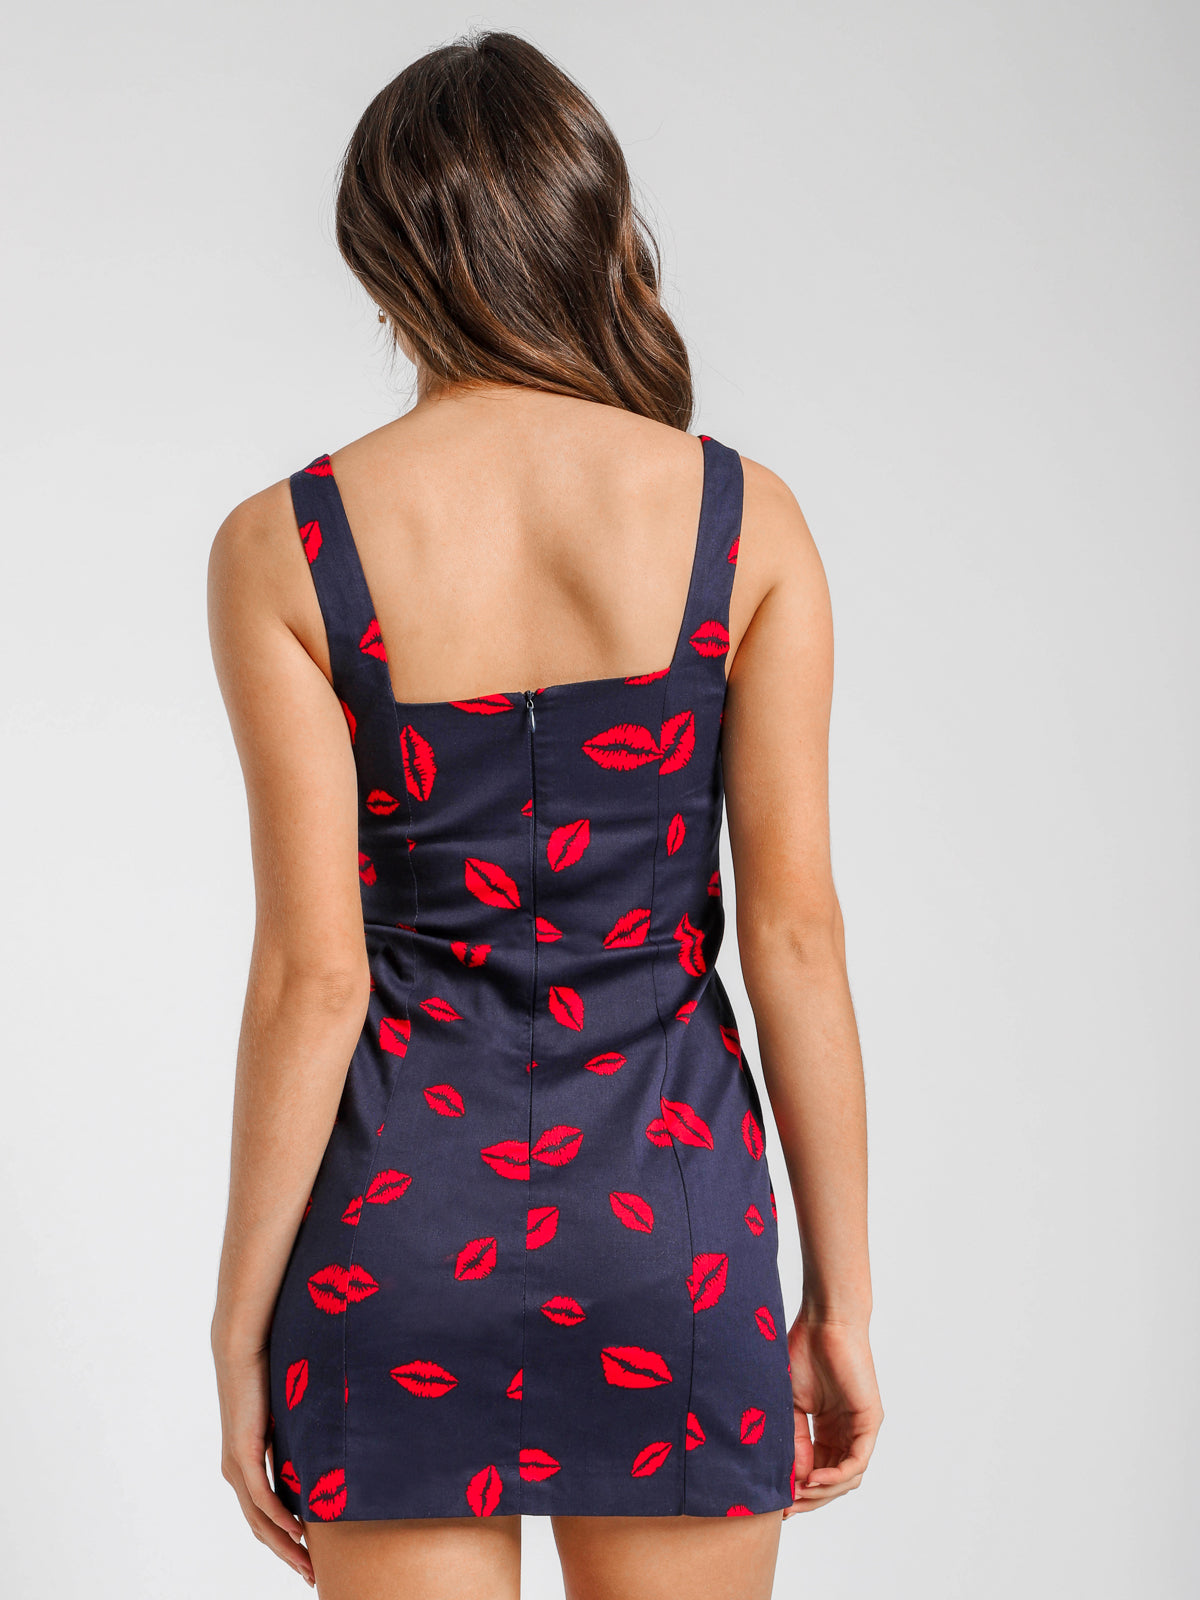 Lip Service Dress in Navy &amp; Red Kiss Print